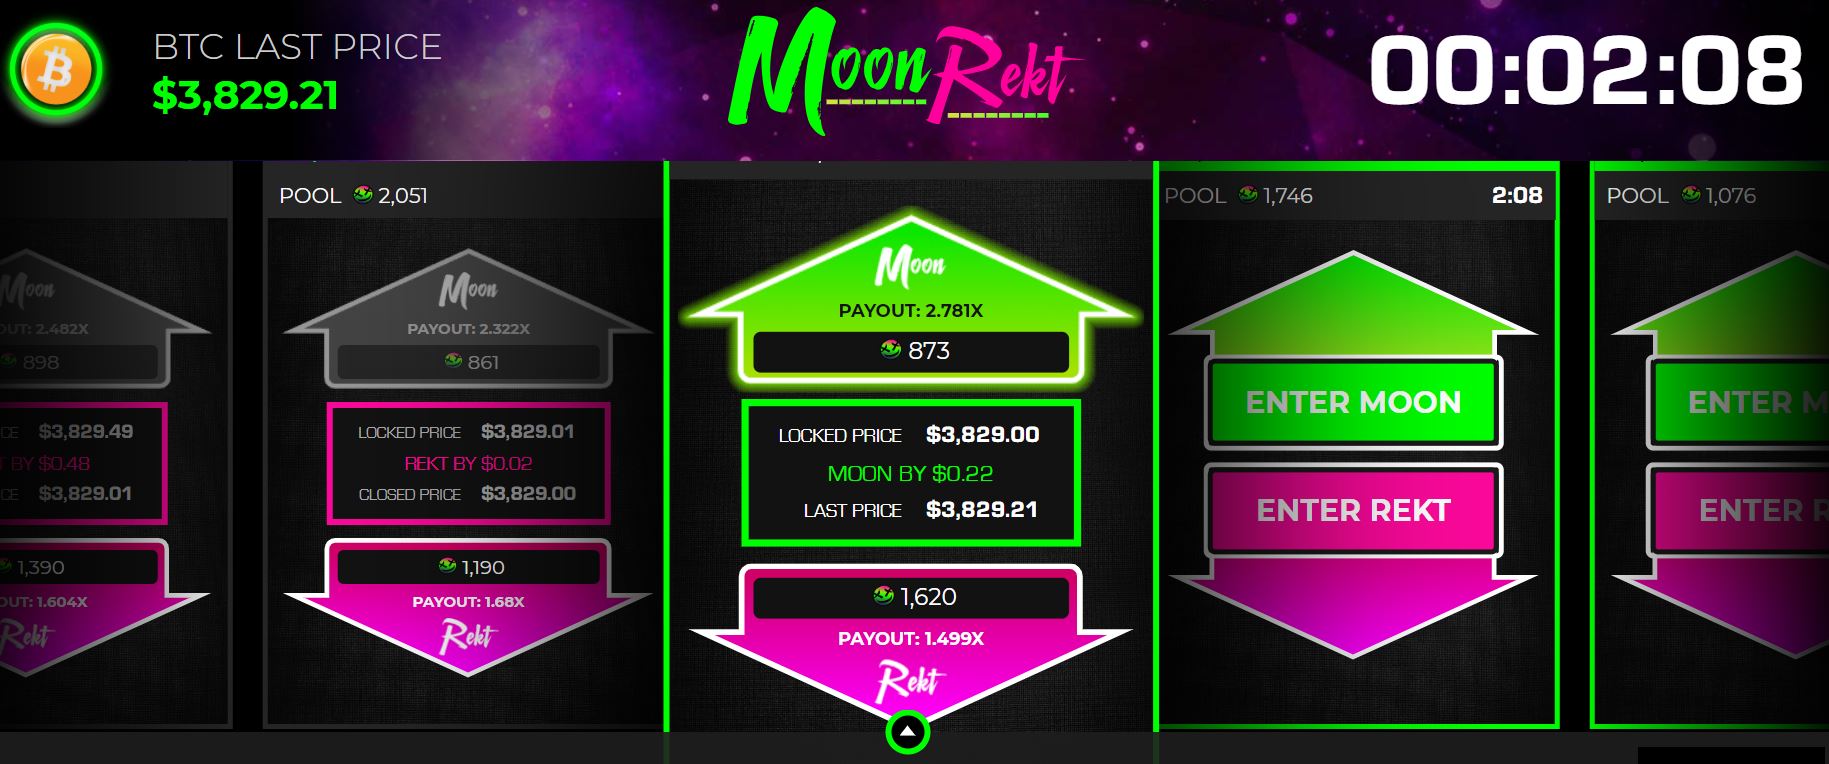 Crypto Price Betting Game MoonRekt Now Allows Bitcoin Wagers